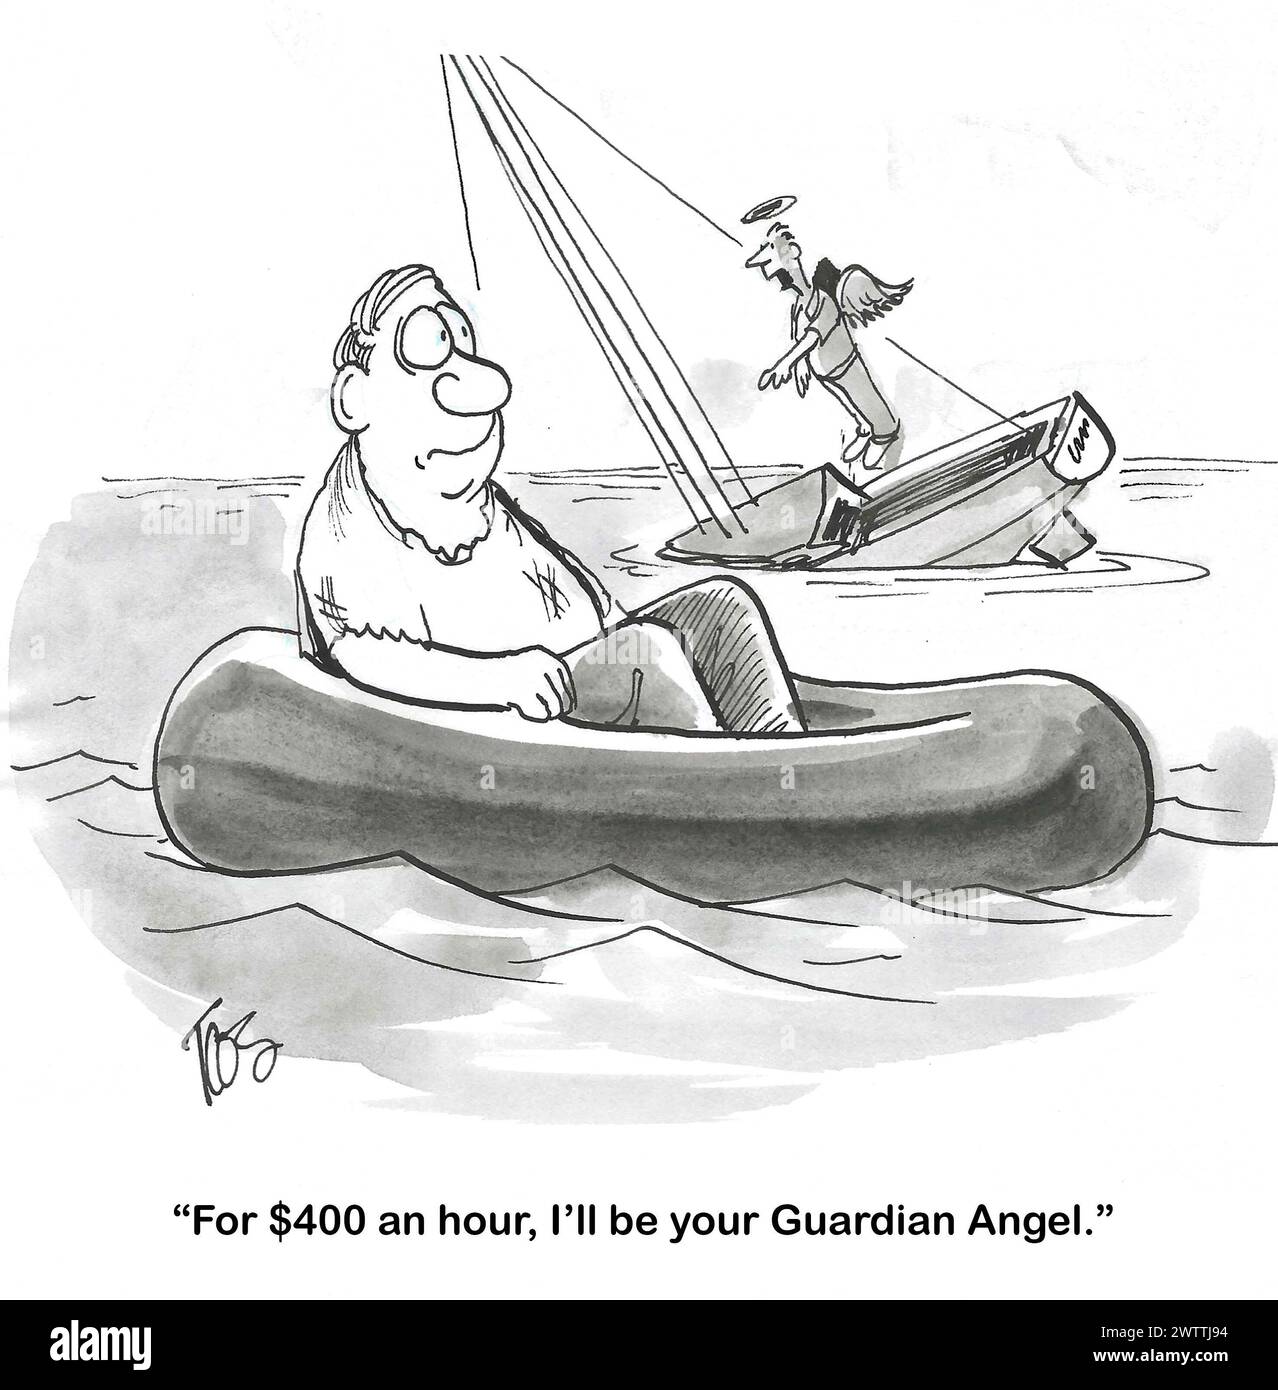 BW cartoon of a man adrift at sea.  His guardian angel offers services for a fee. Stock Photo